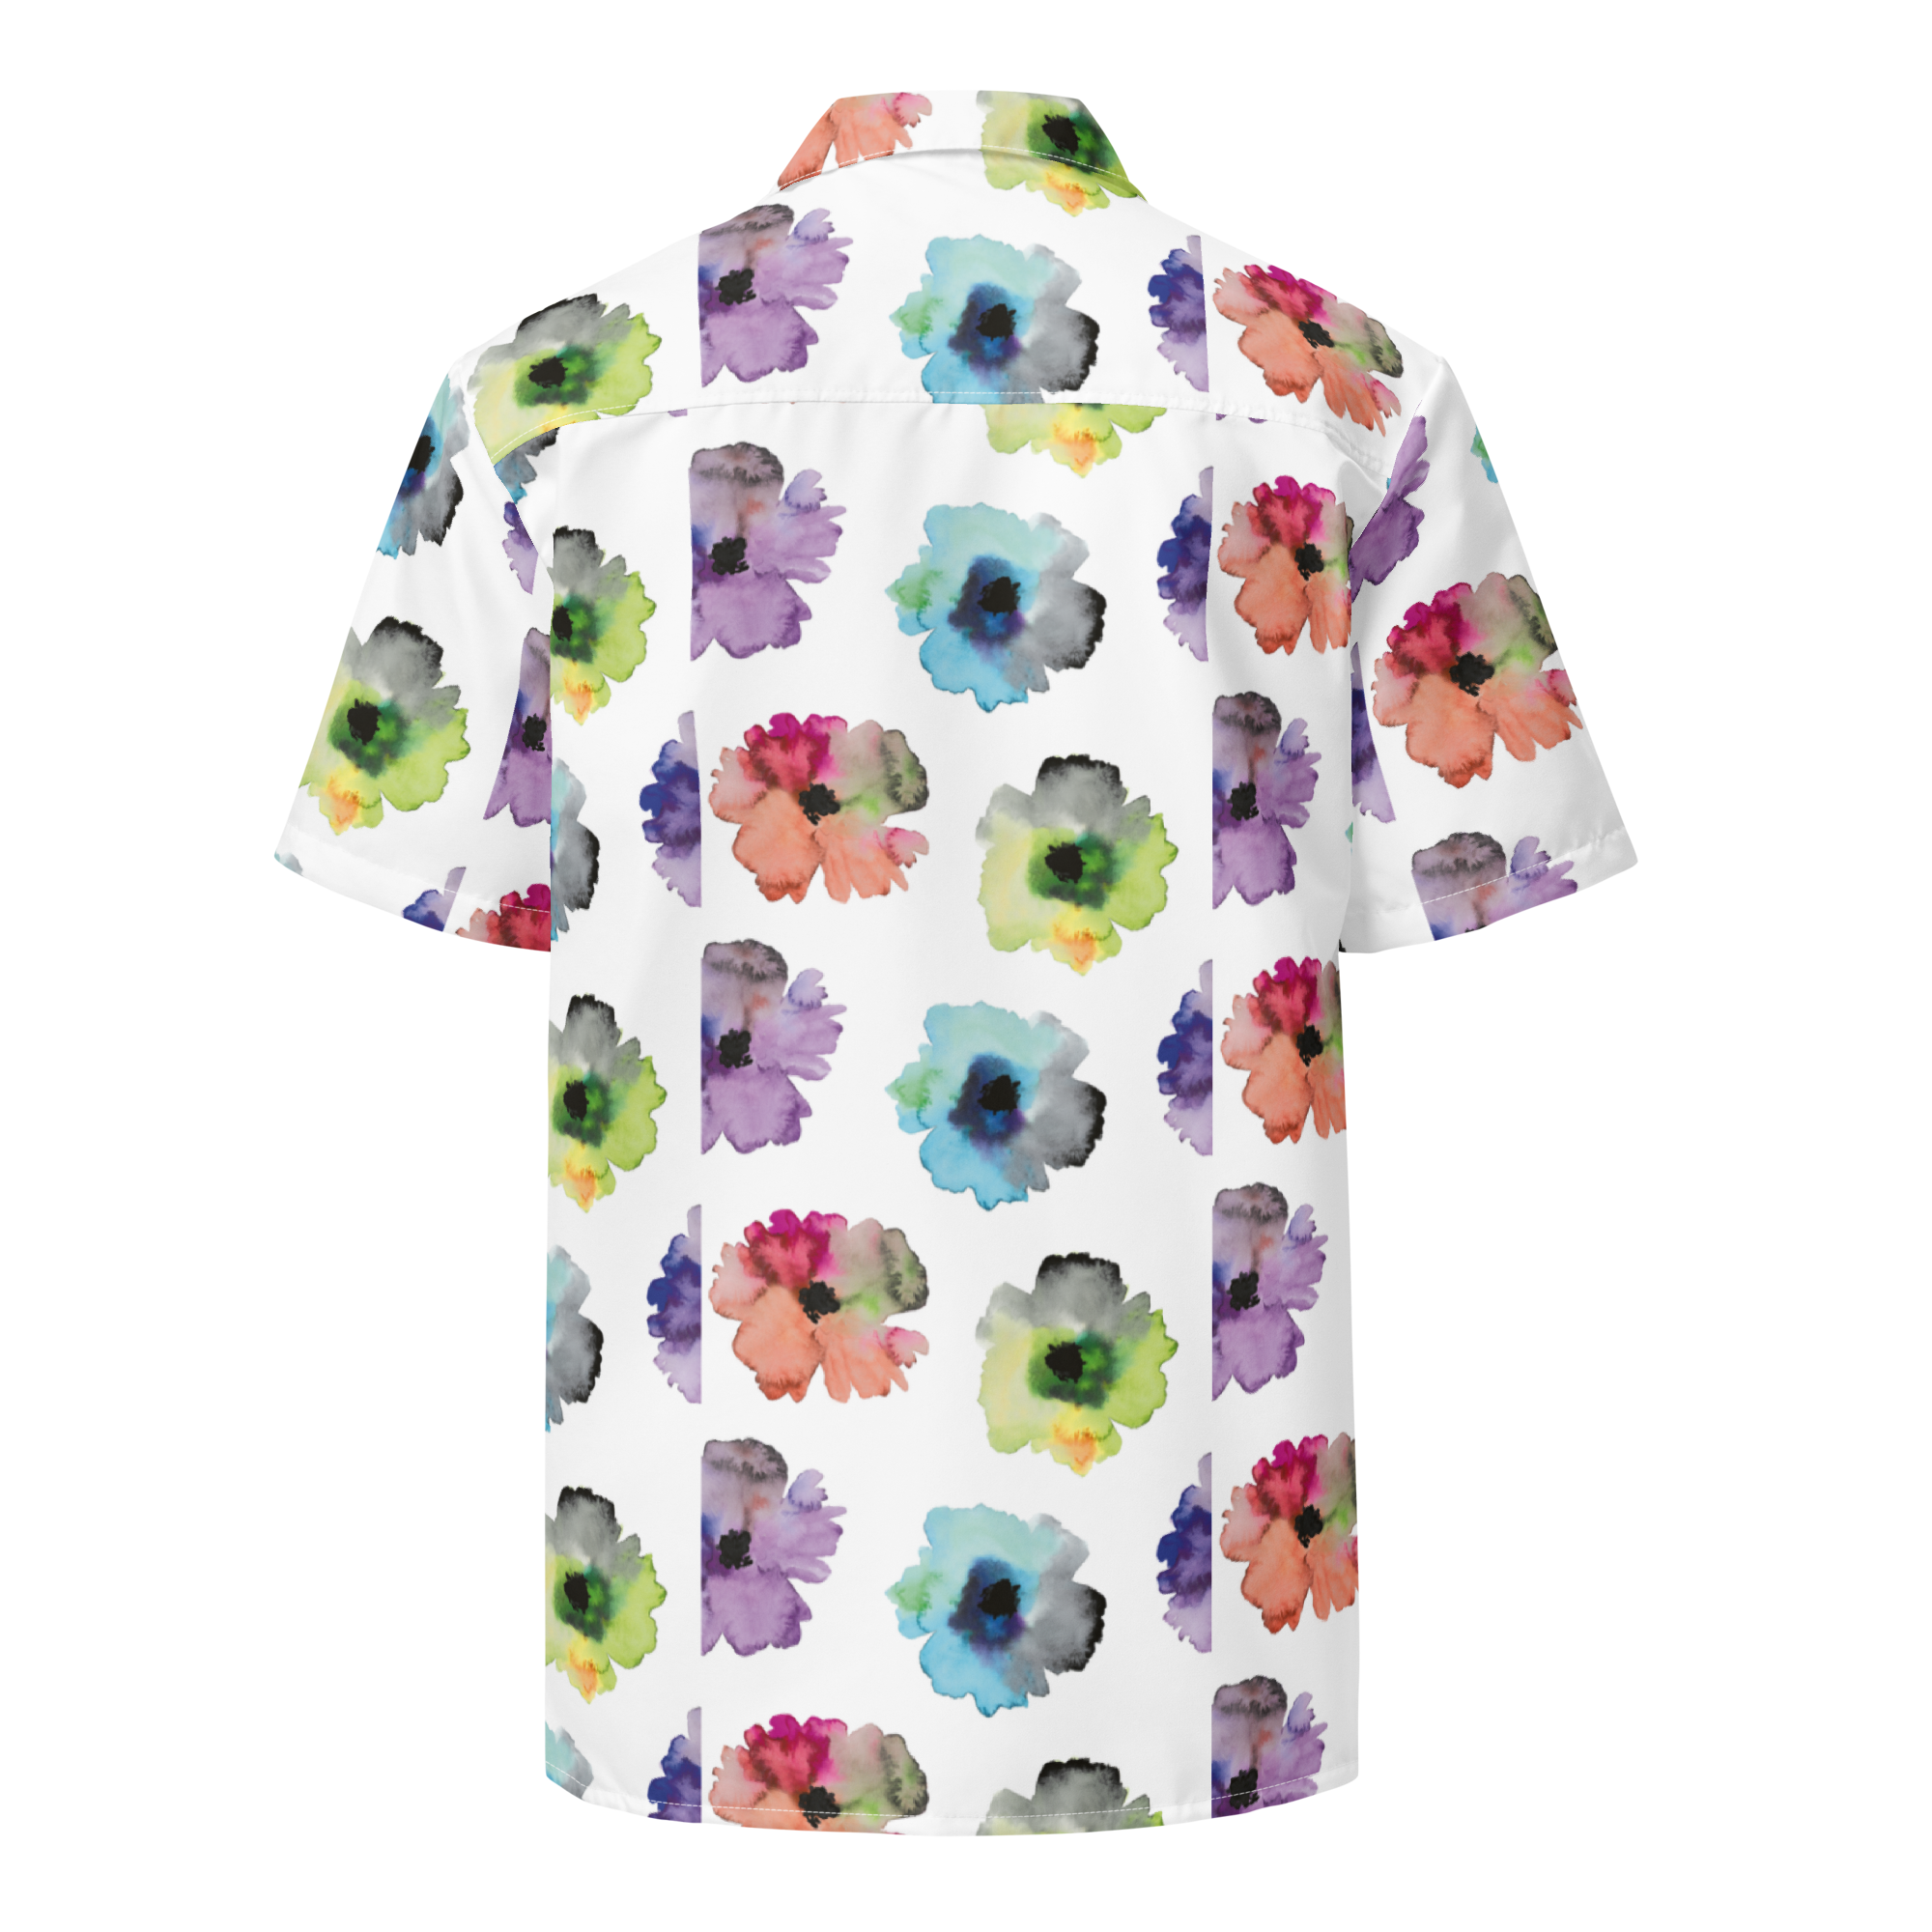 Water Color Bloom - button shirt